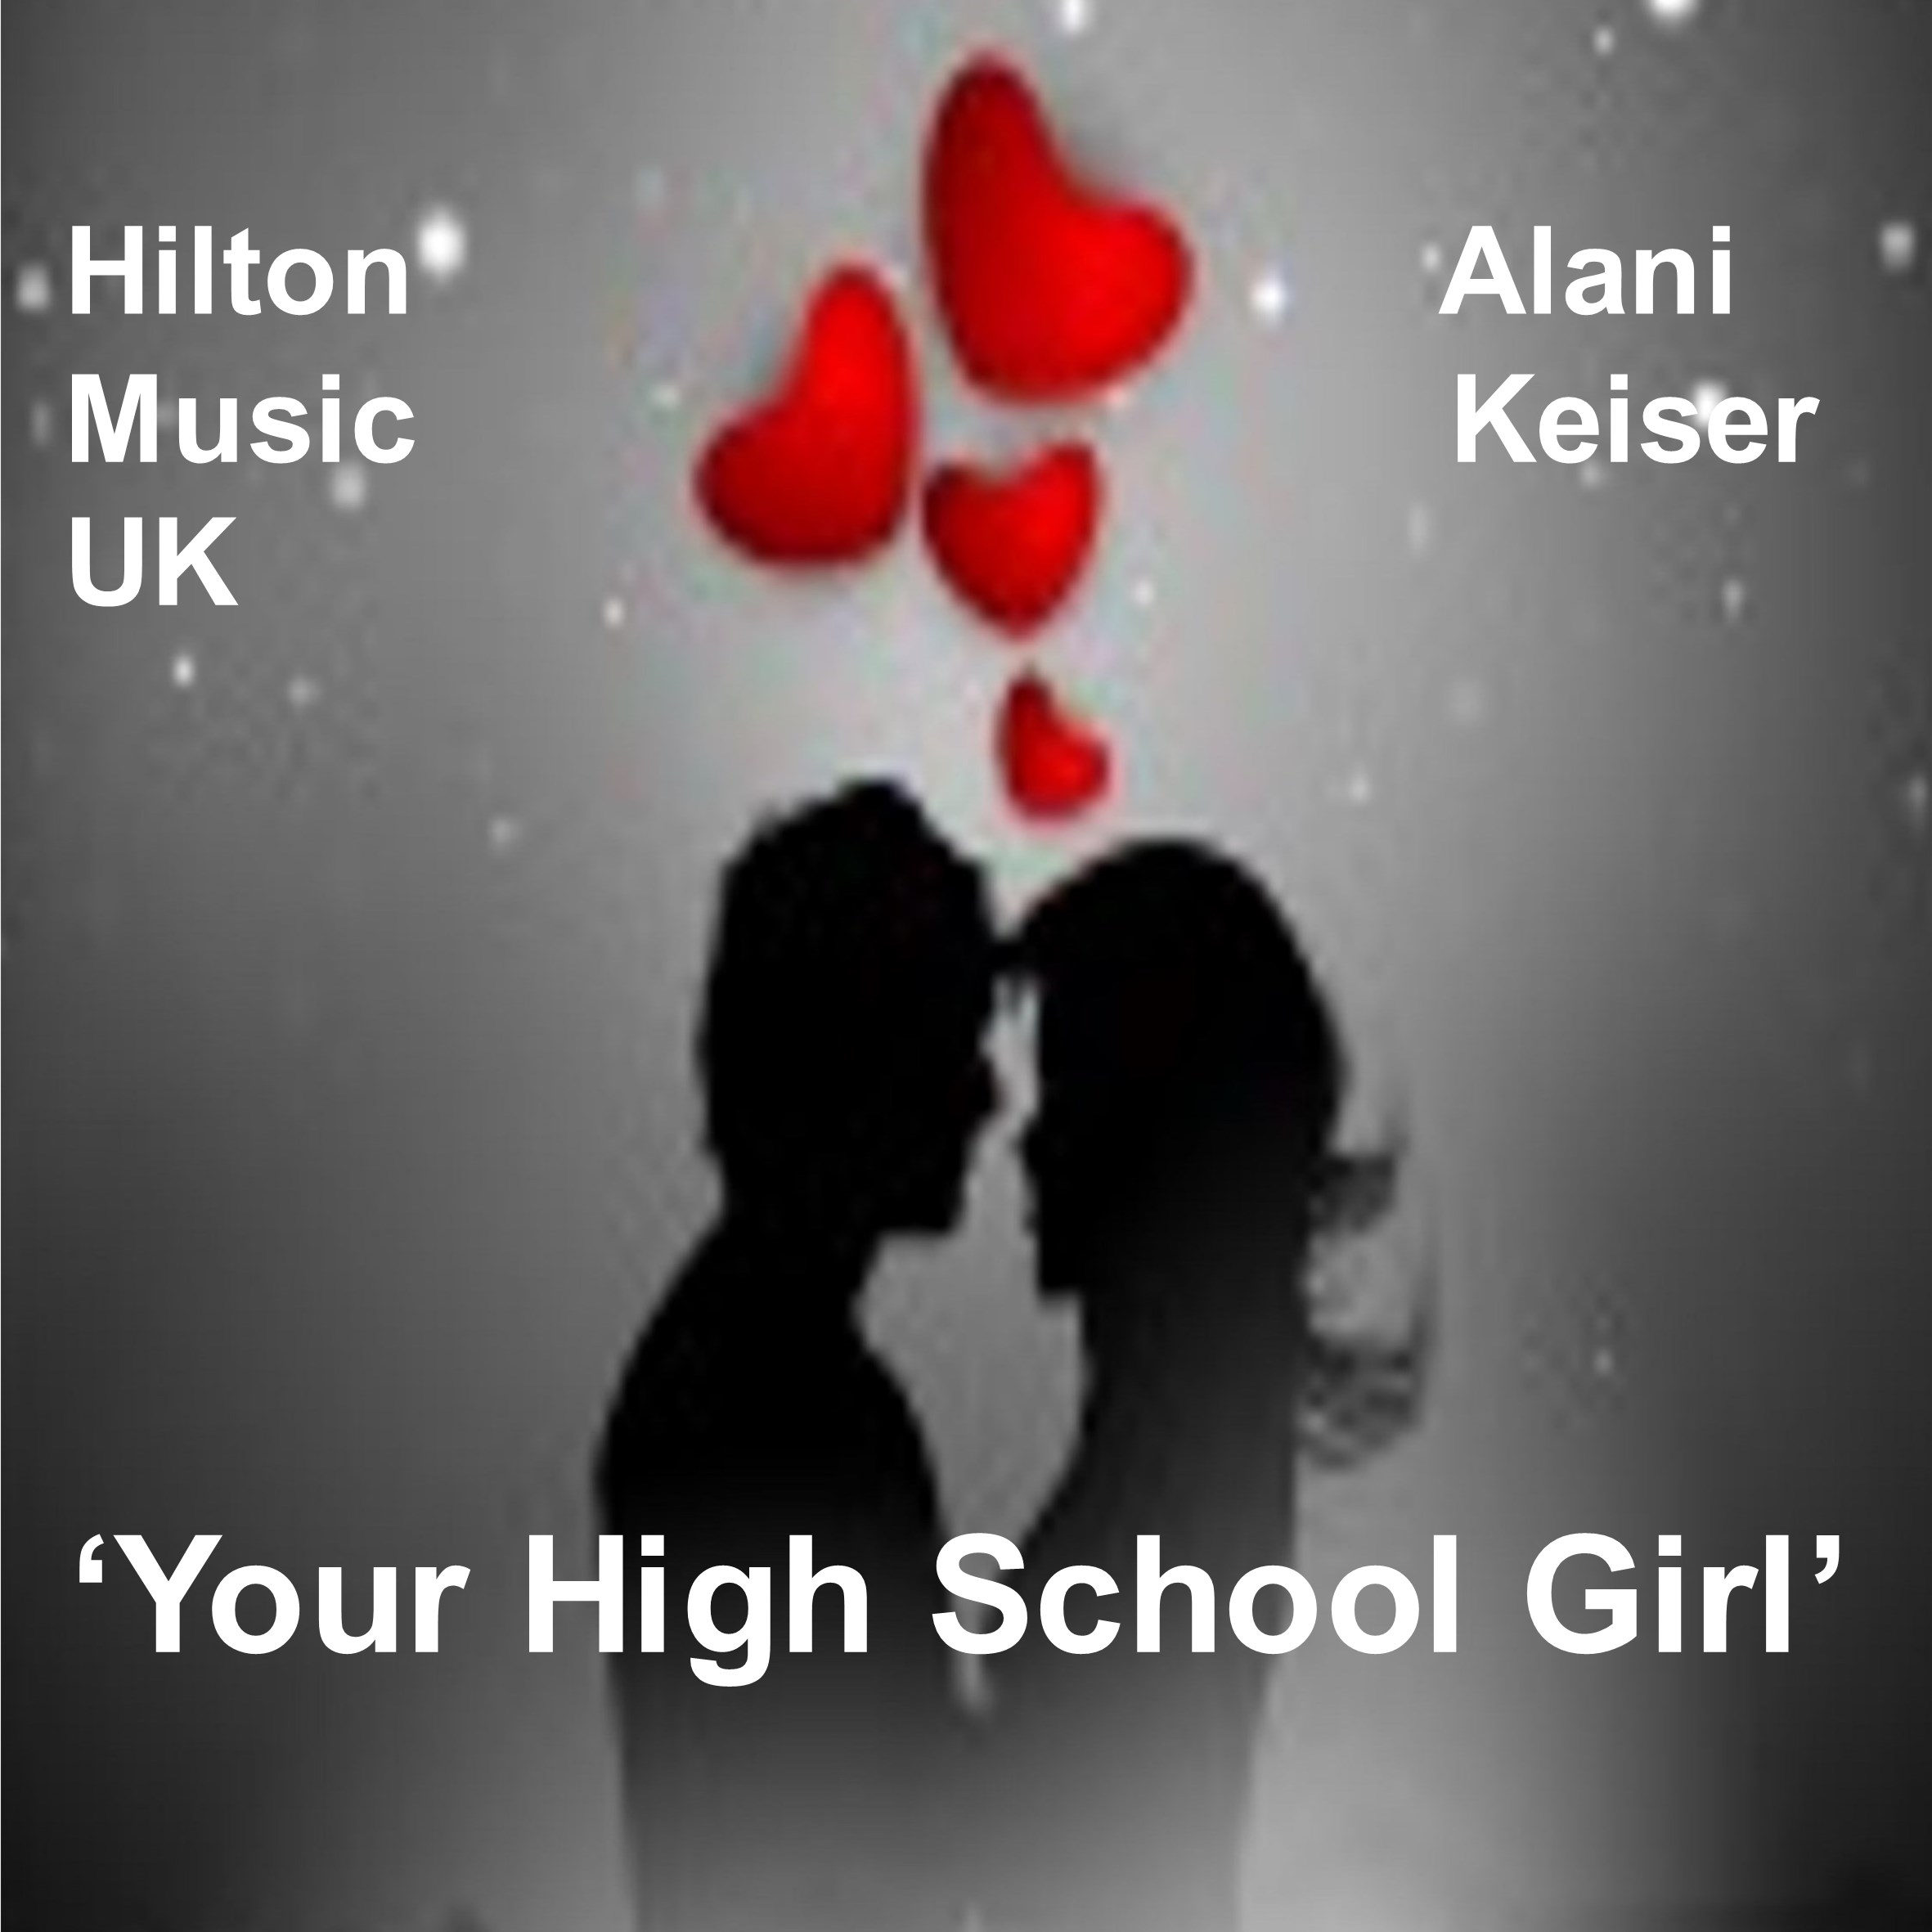 ALANI KEISER sings 'YOUR HIGH SCHOOL GIRL' - a brand-new 'oldie' - 1950's style nostalgia from Hilton Music UK 